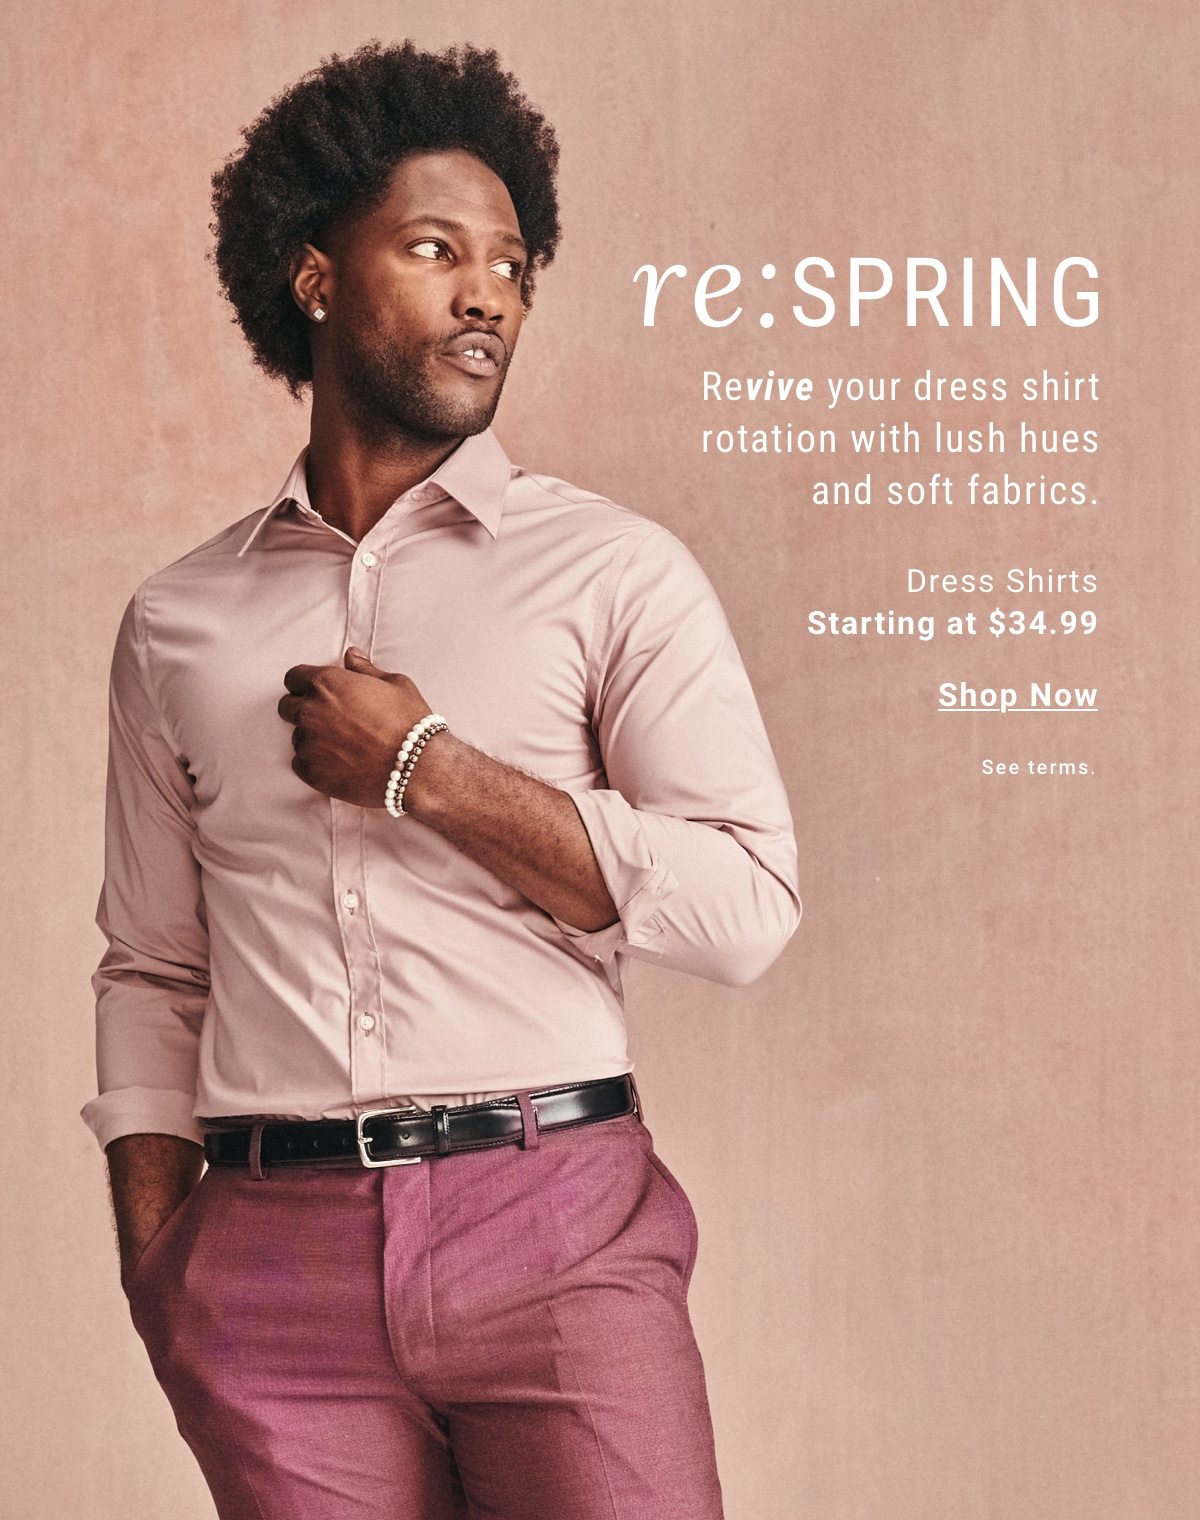 Revive your dress shirt rotation with lush hues and soft fabrics.